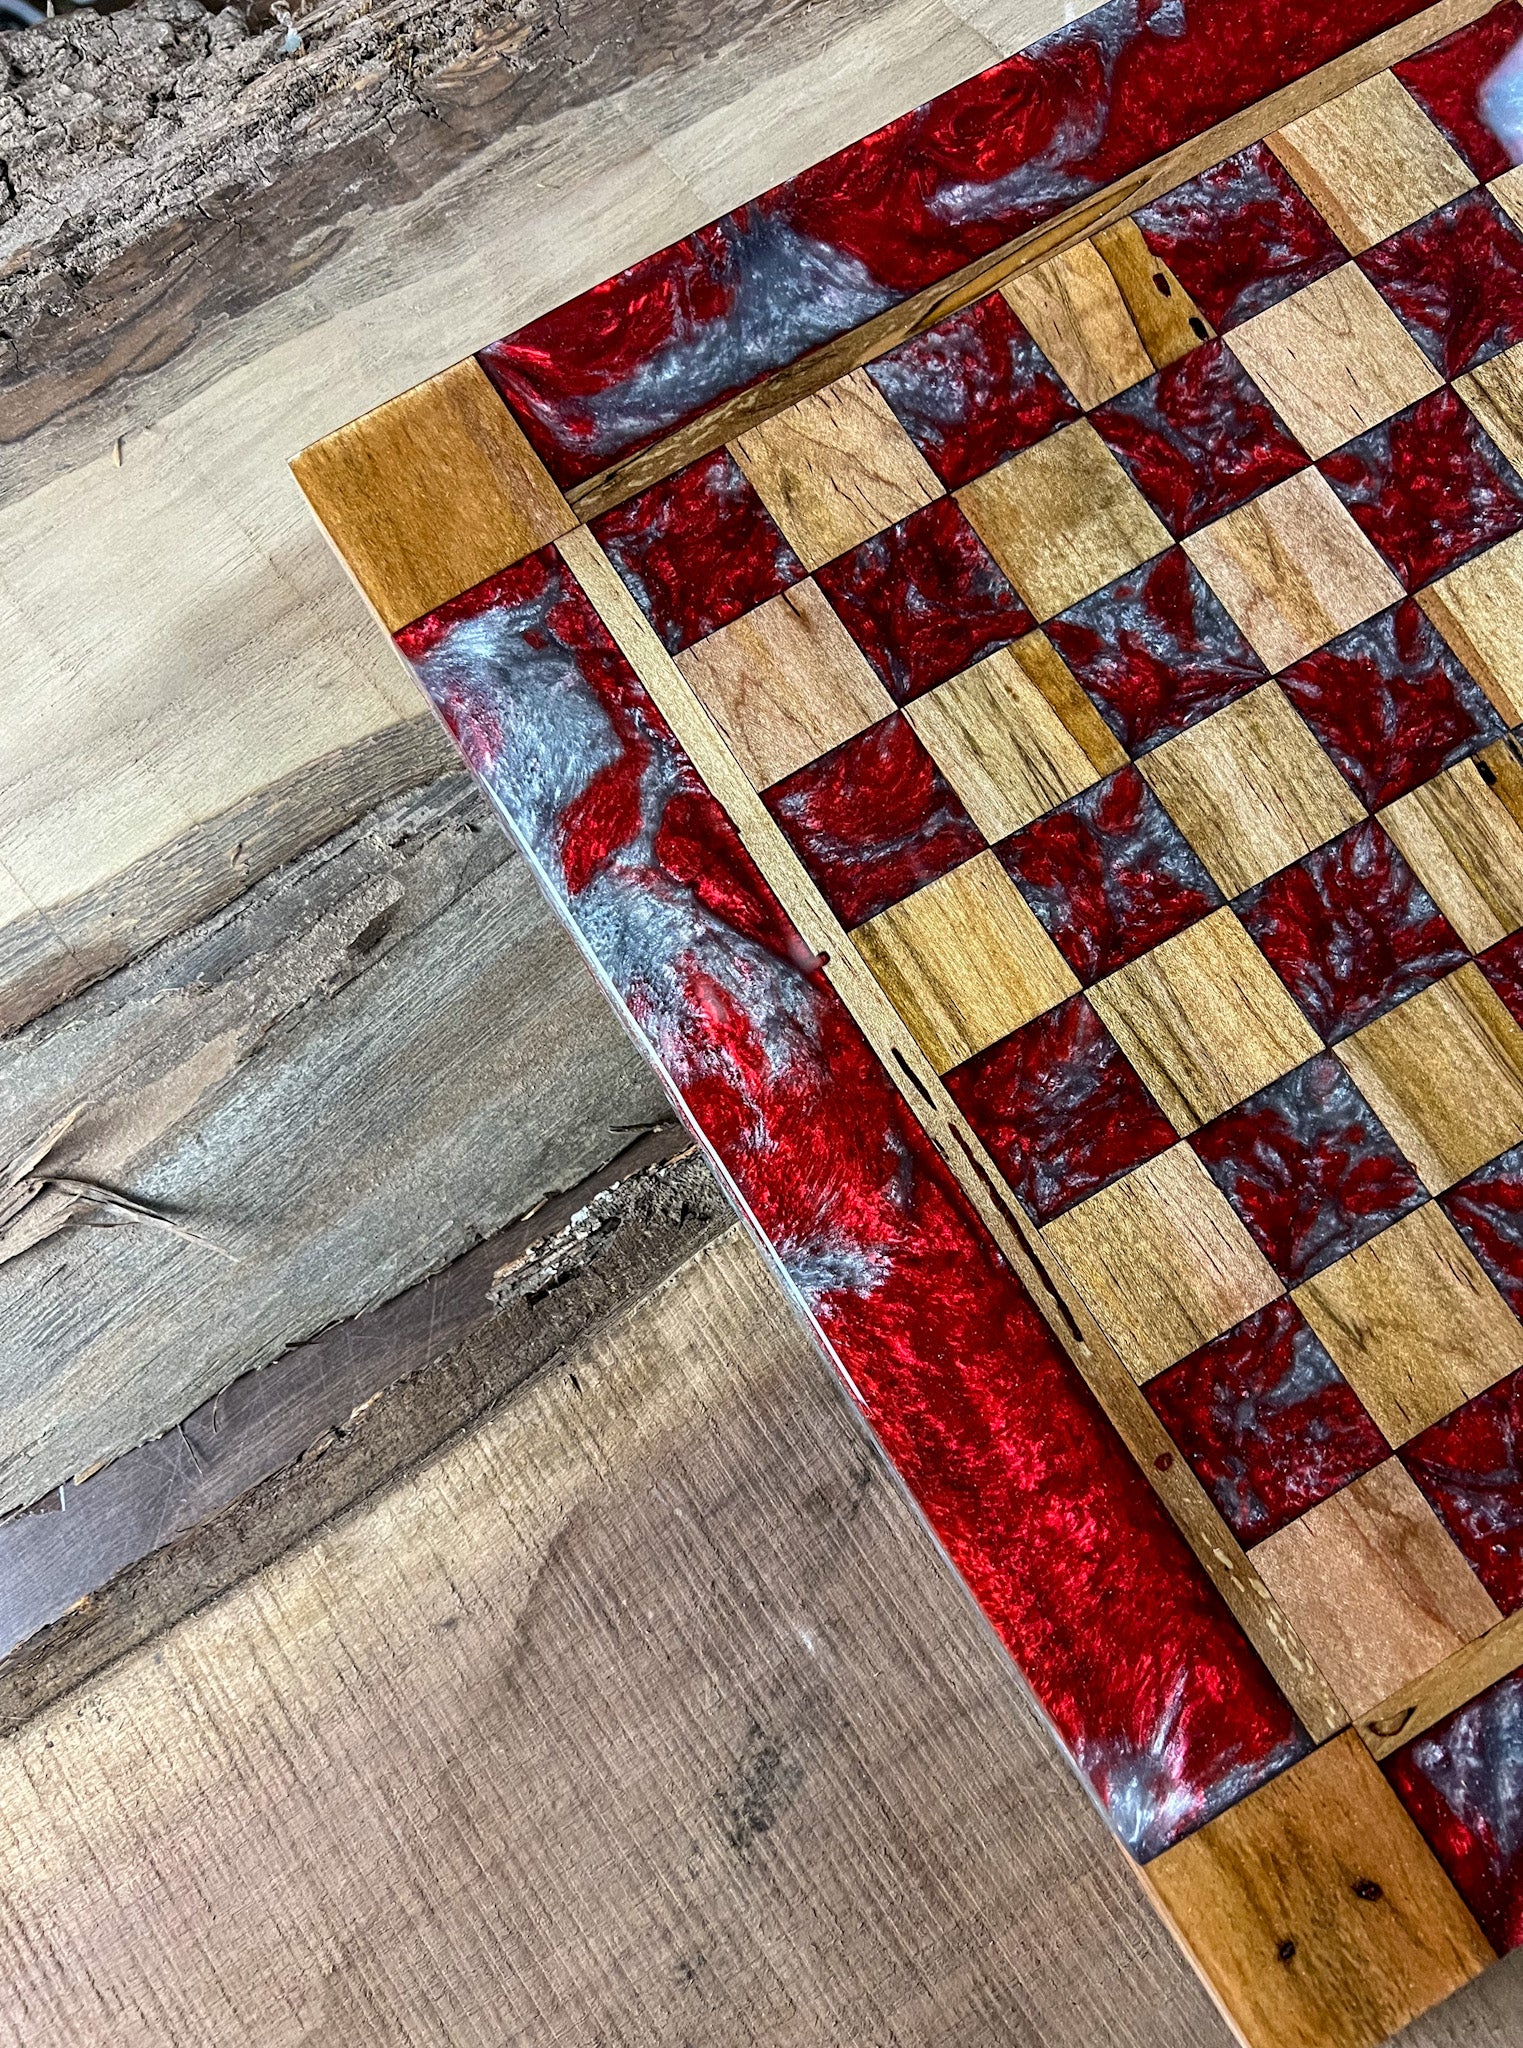 Red Silver Cloud Maple Wood Chess Board (With Border)